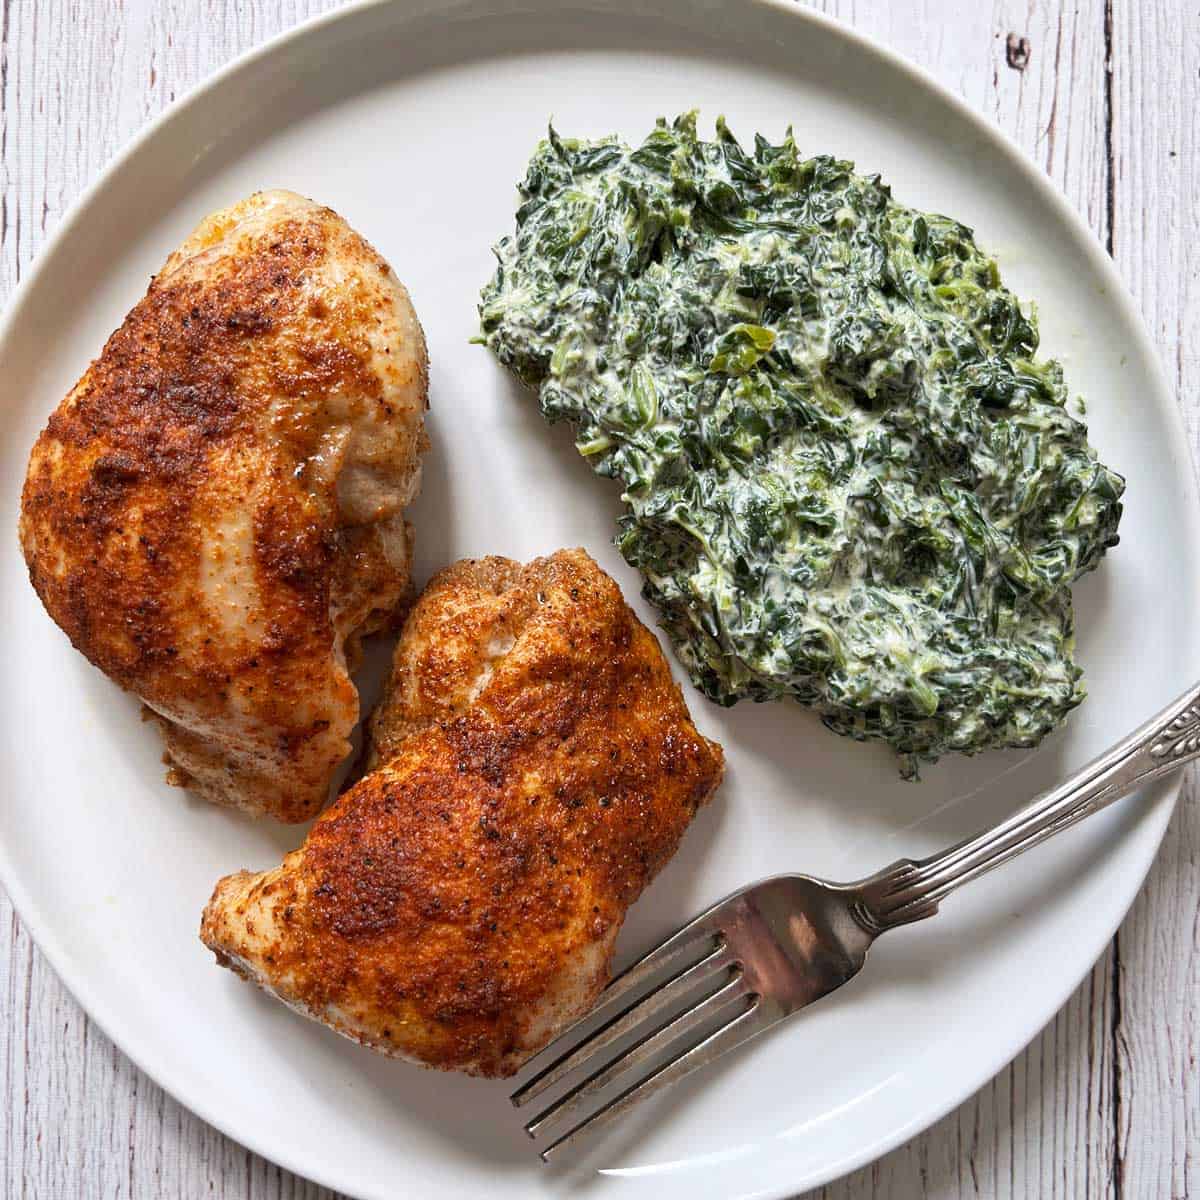 Two boneless chicken thighs are served with creamed spinach.